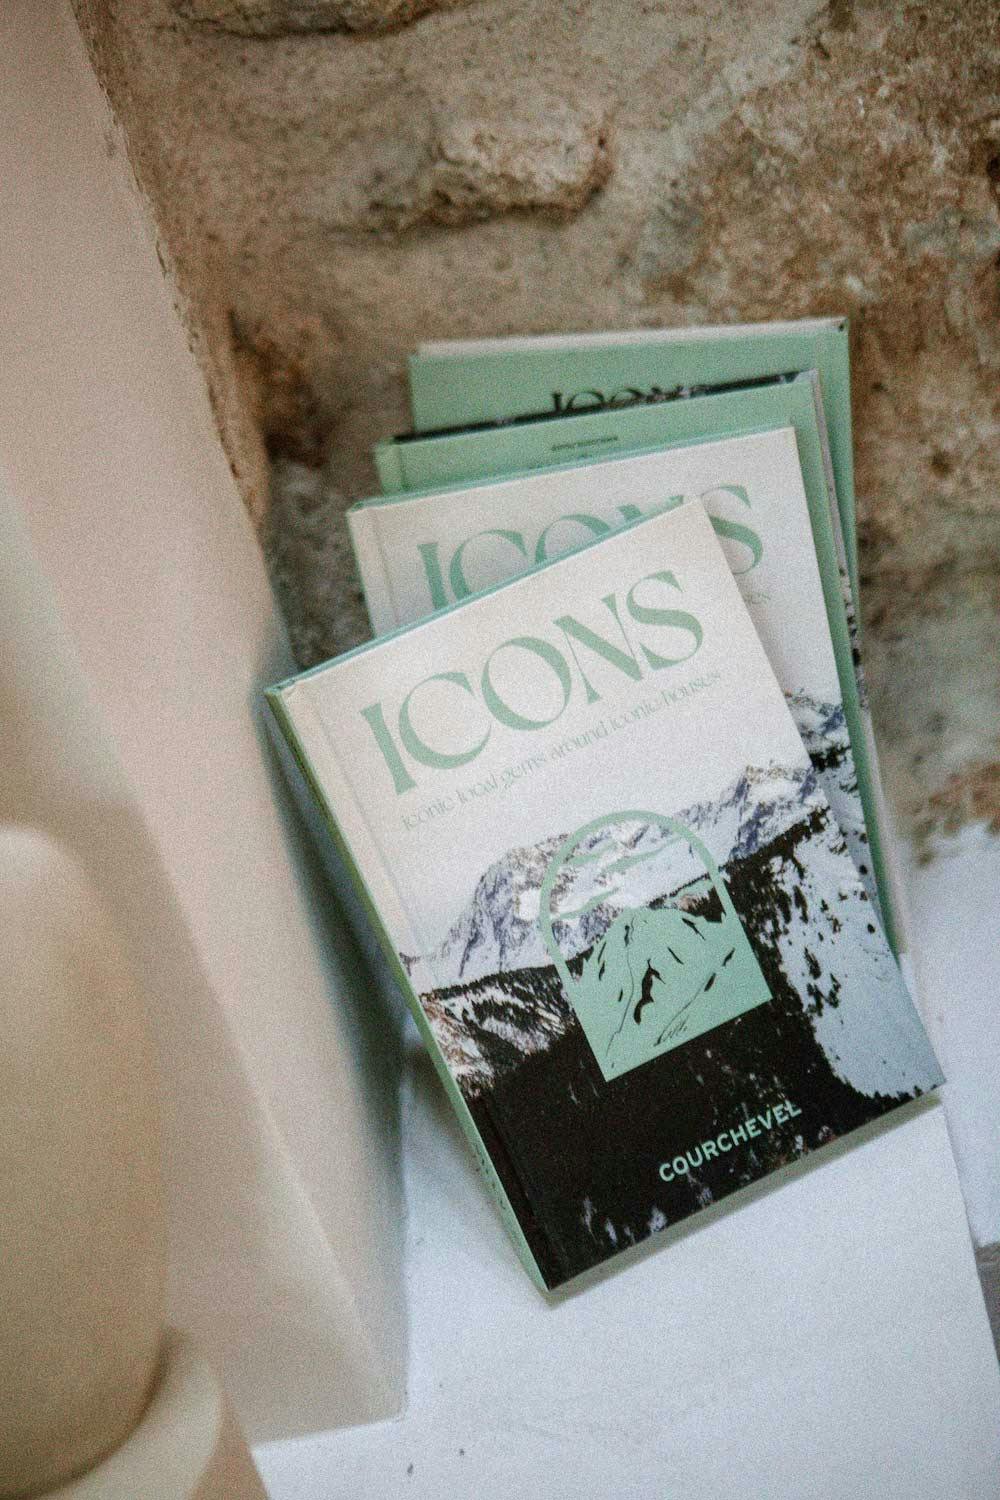 3 copy of "Icons, Courchevel" book standing against a stone wall